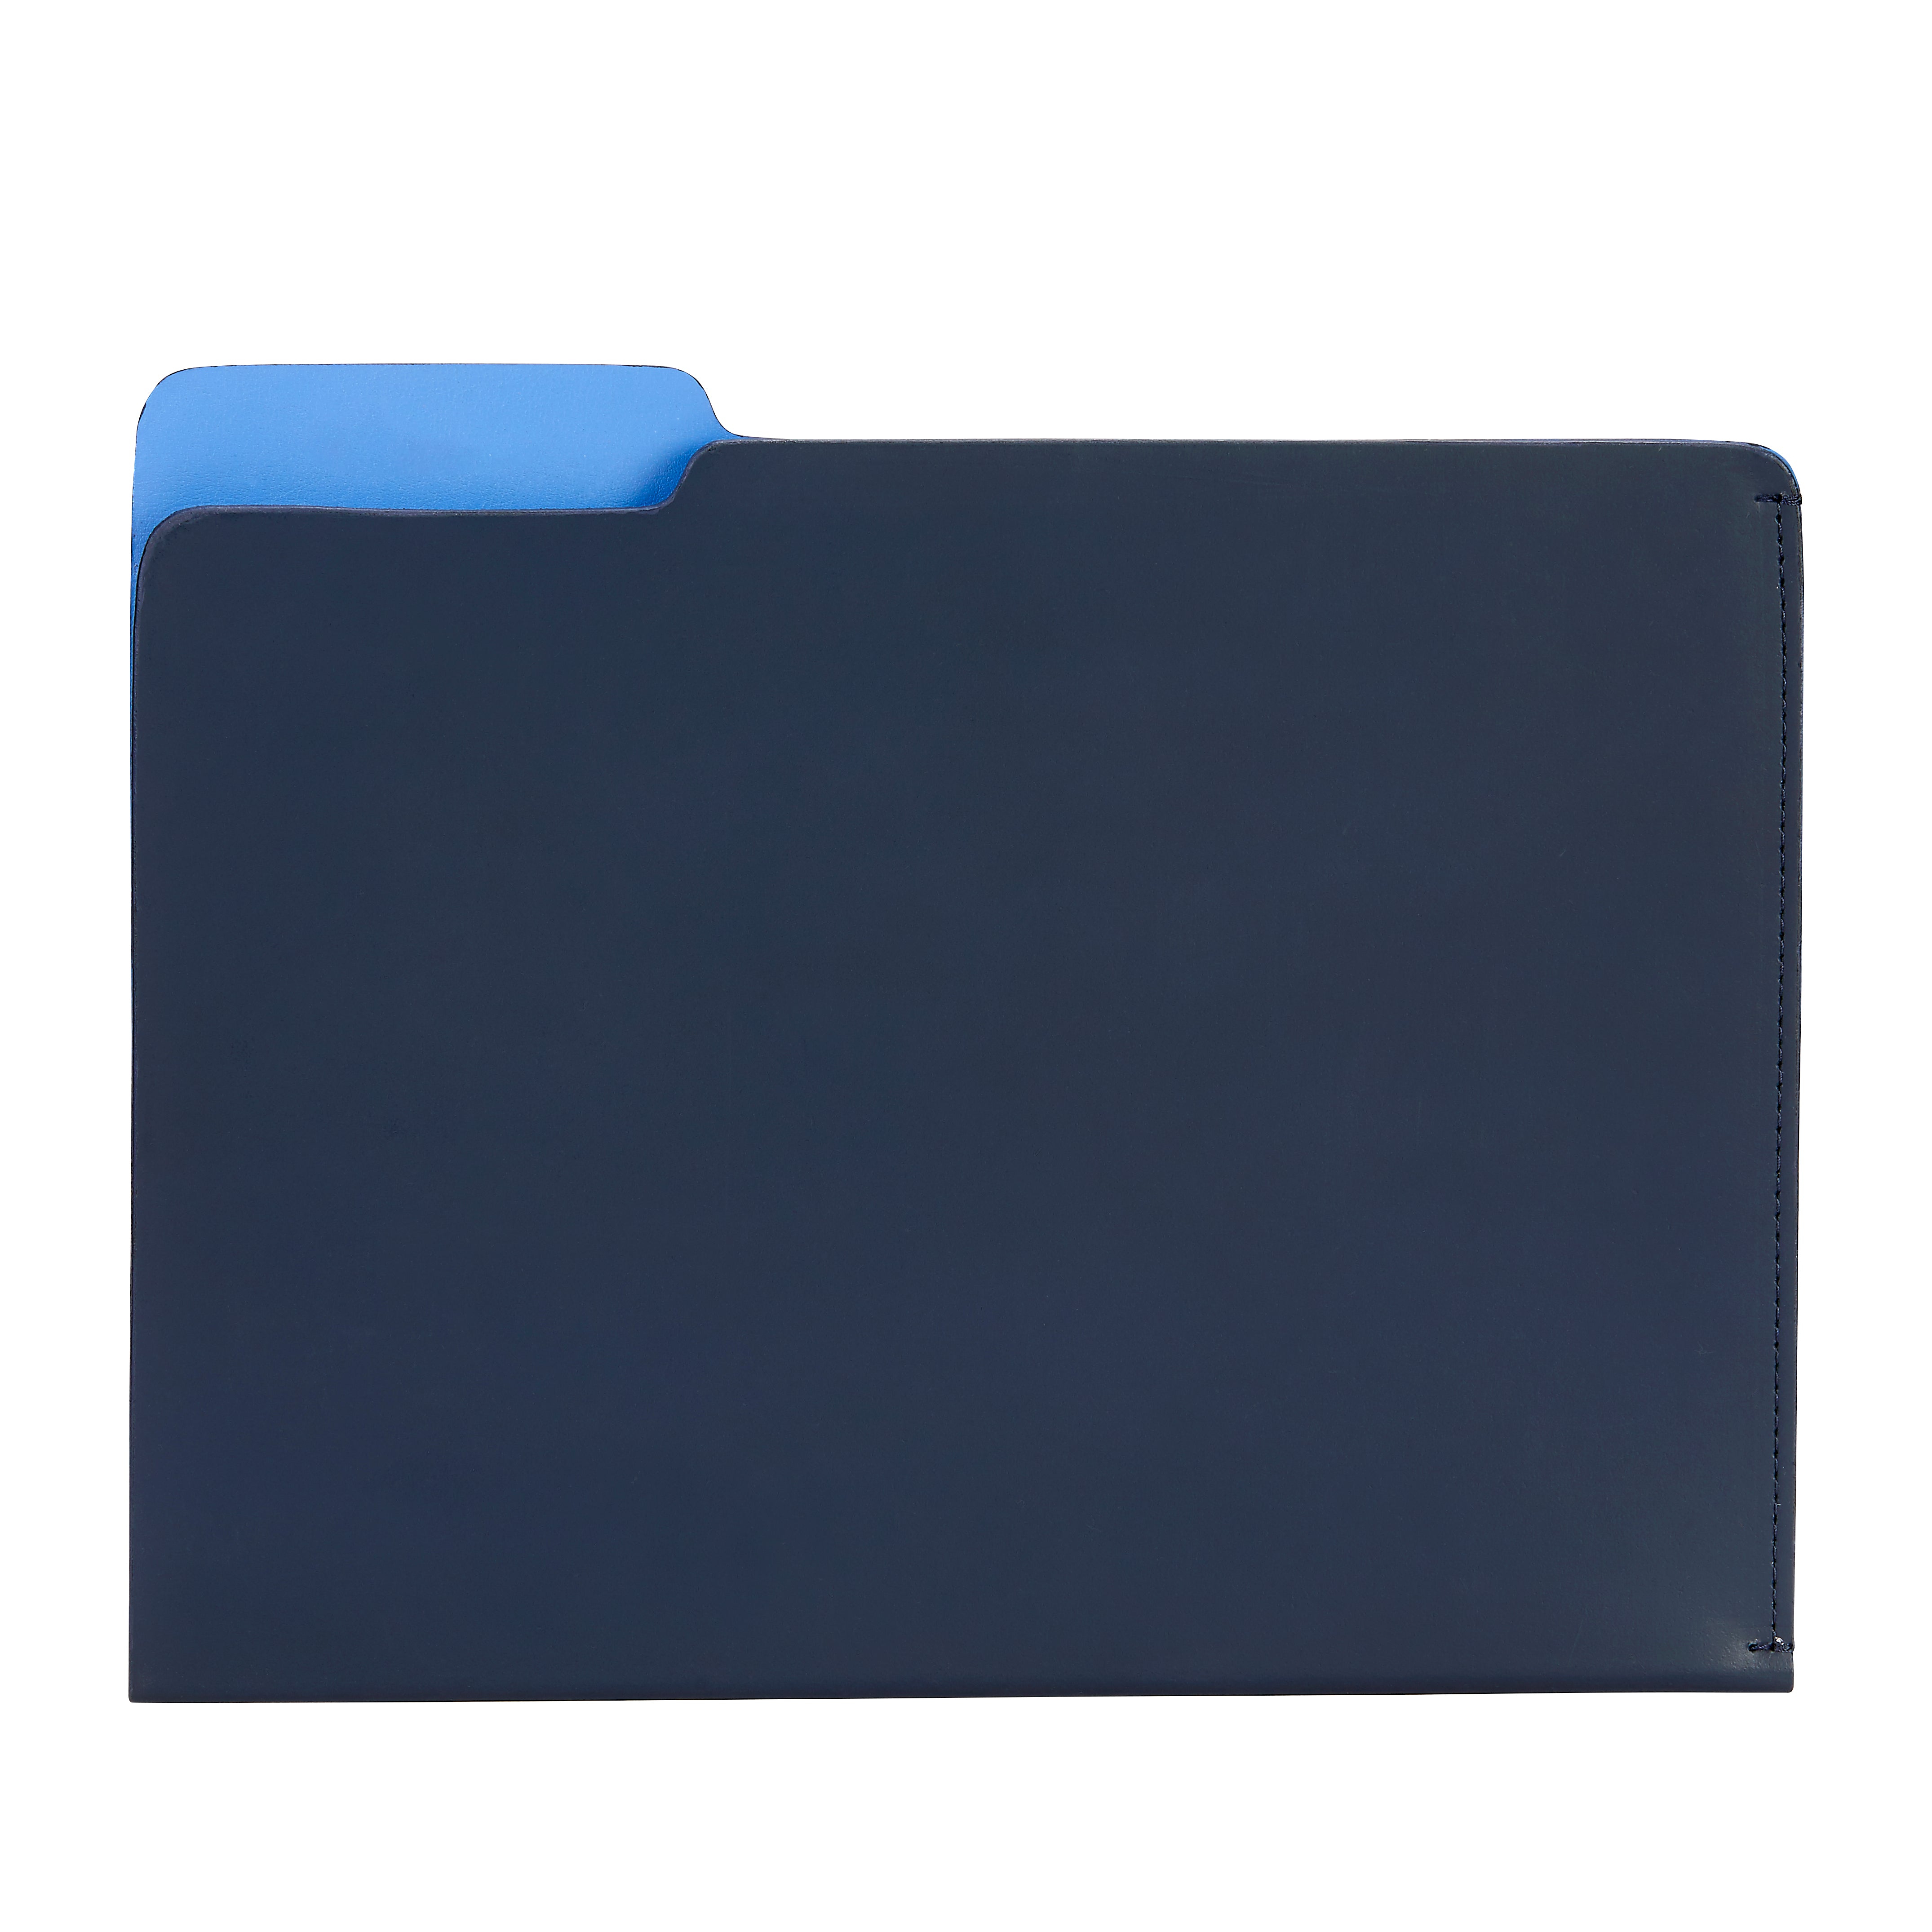 Graphic Image Carlo File Folder Navy/Blue Leather